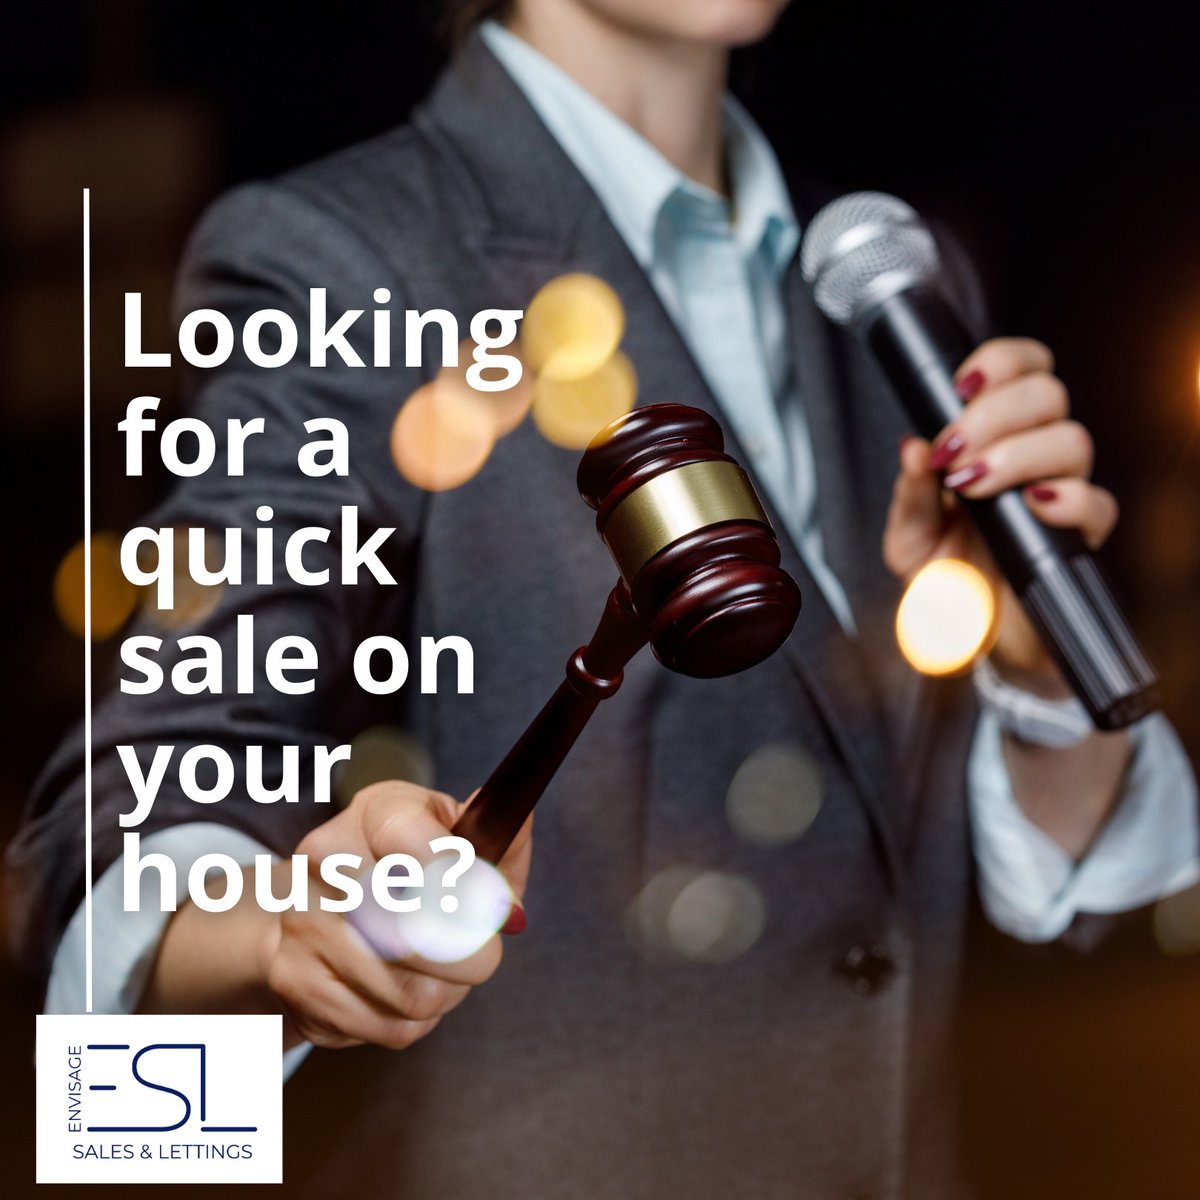 🙏 We have dedicated ourselves to providing the most comprehensive sales and lettings service in Coventry. 

That is why we have included property auctions, which are a safe and ethical way to sell your property quickly. 

envisageproperty.com/auction/  #propertyauctions